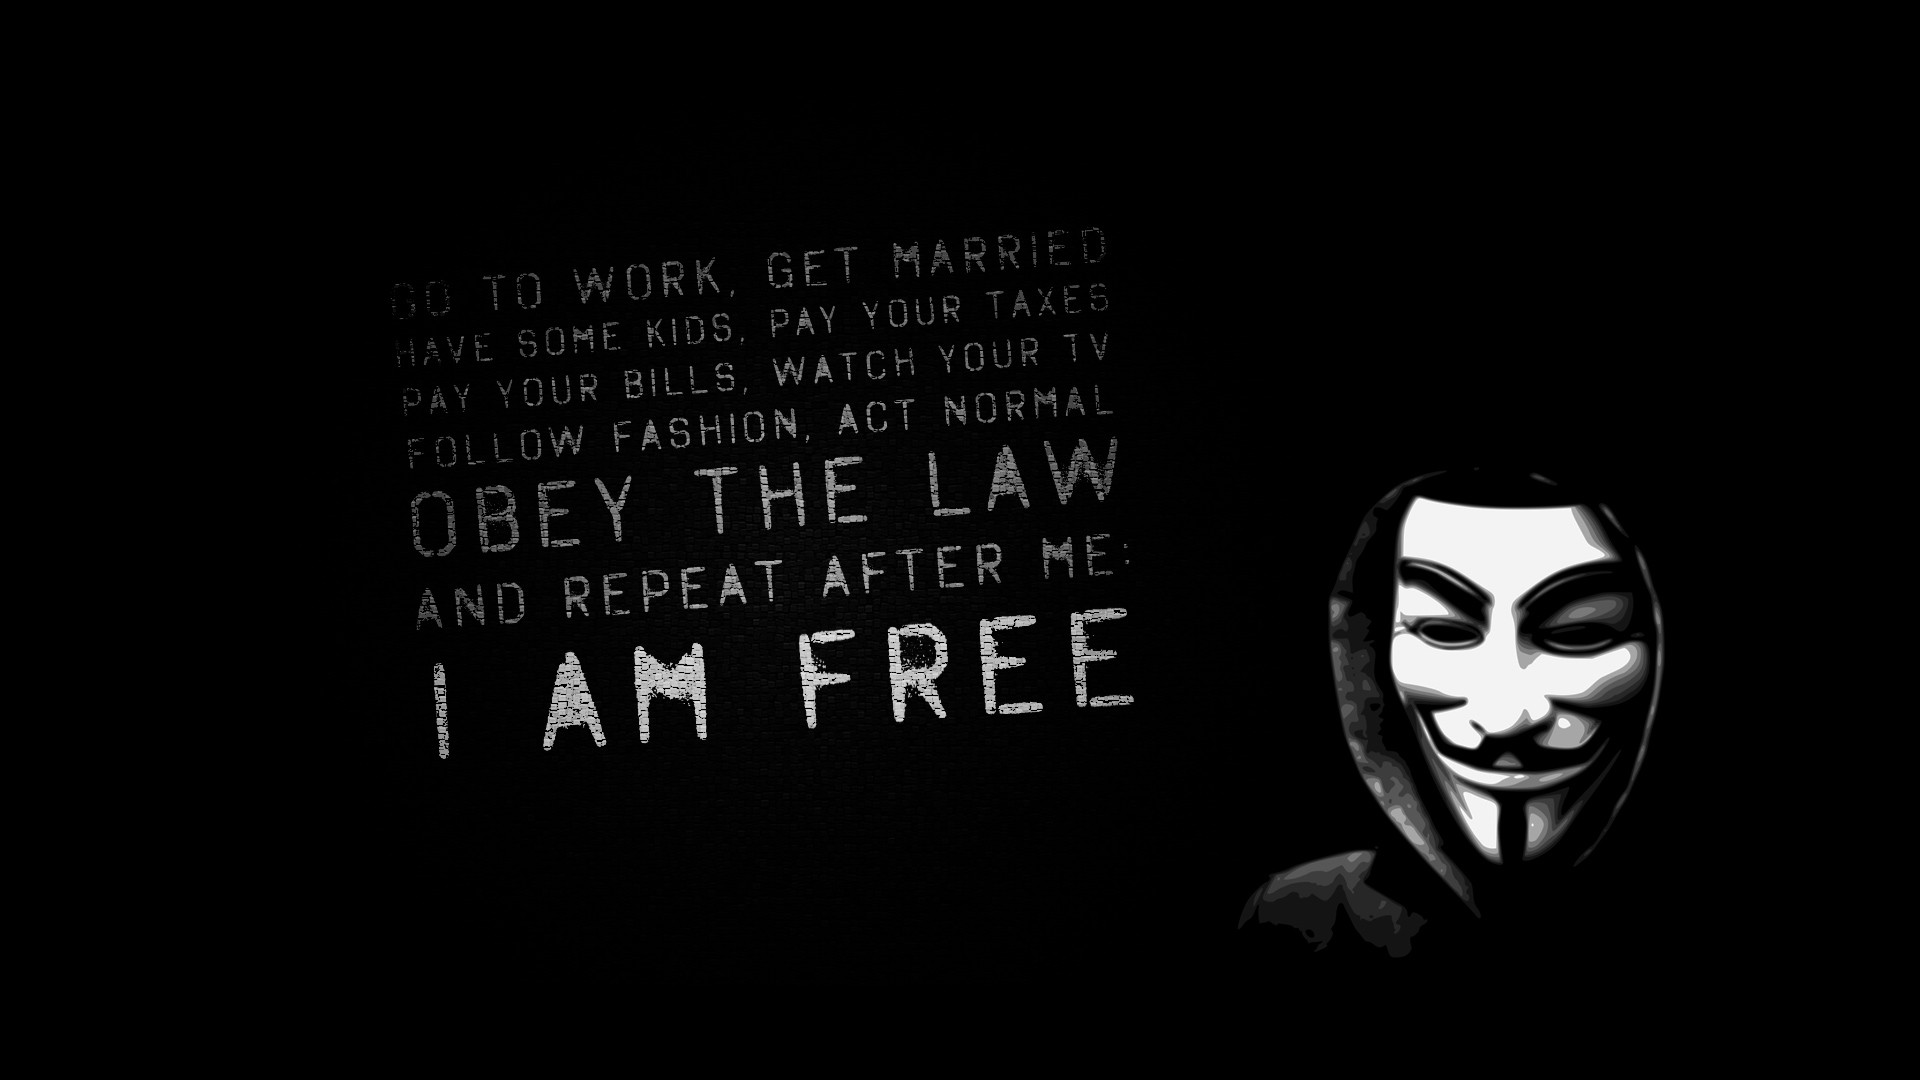 Anonymous Wallpapers HD for Android Free Download on MoboMarket | HD  Wallpapers | Pinterest | Anonymous, Hd wallpaper and Wallpaper